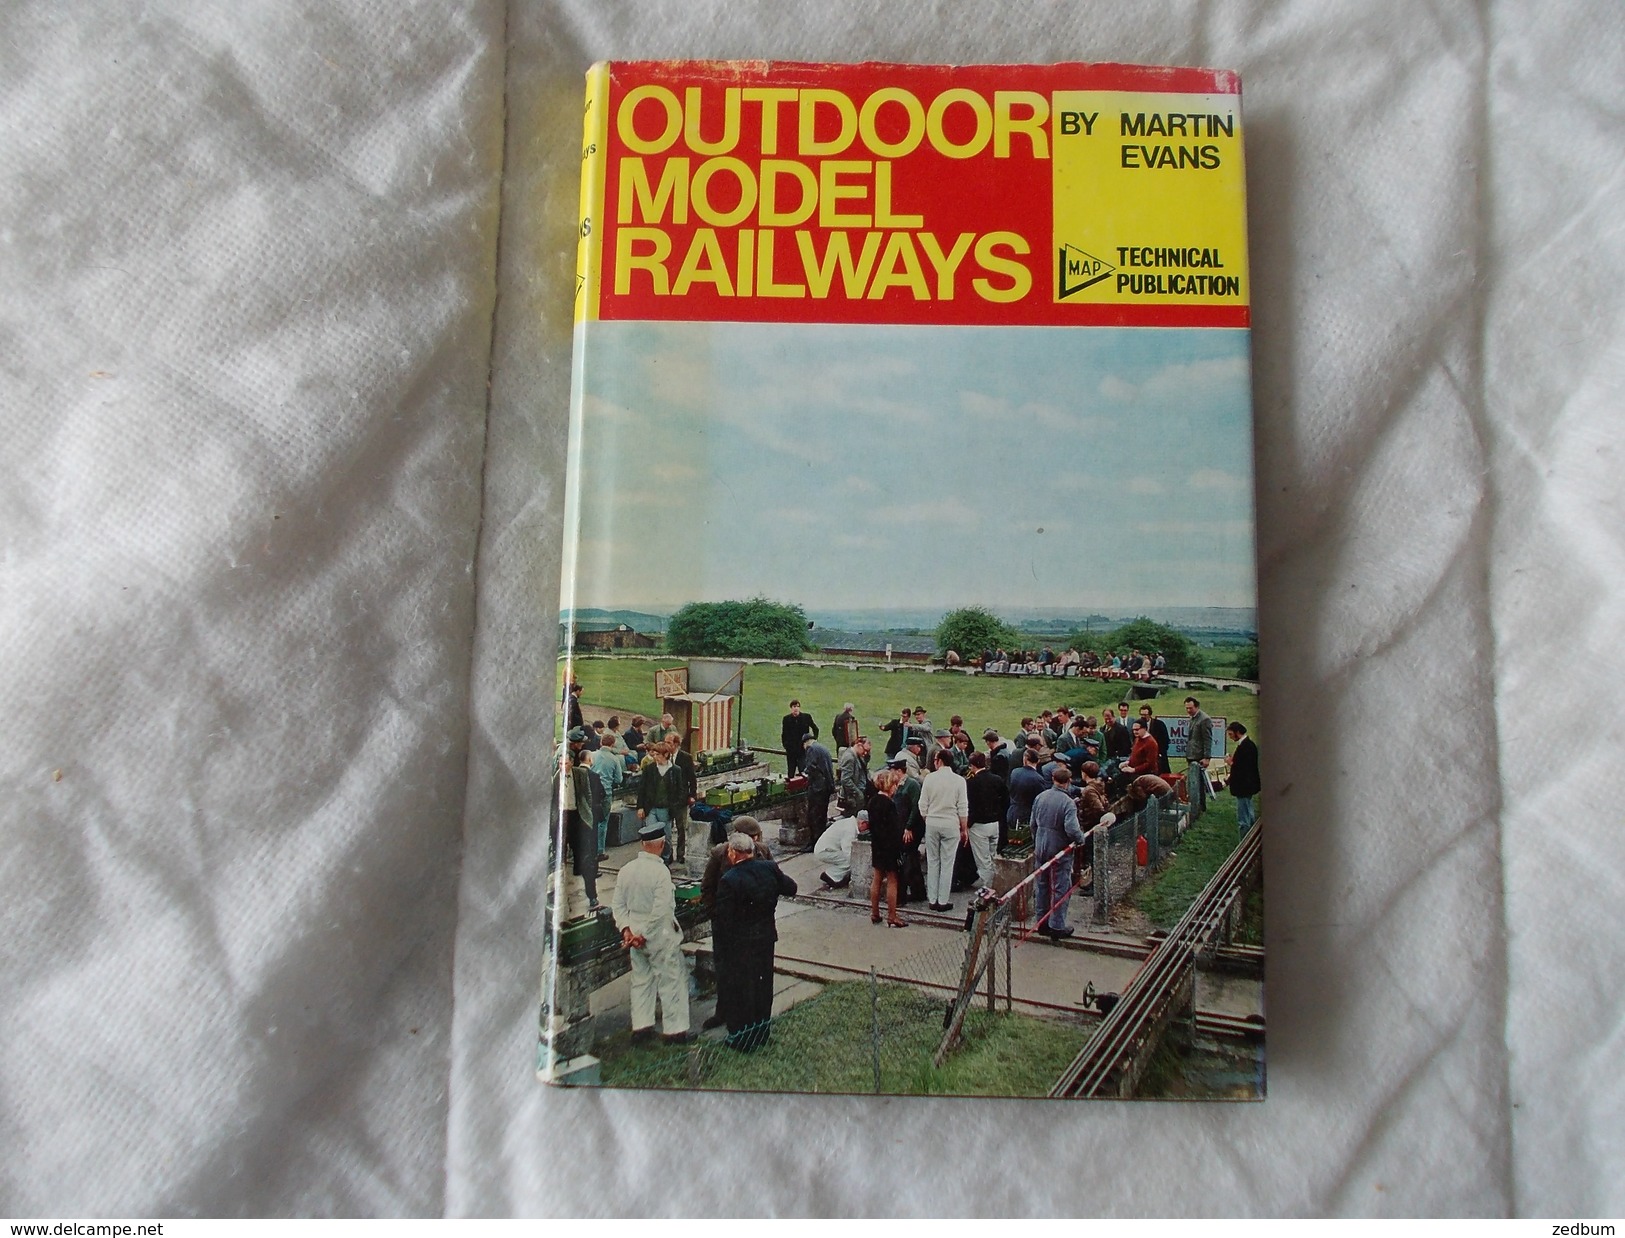 Outdoor Model Railways By Martin Evans - Books On Collecting